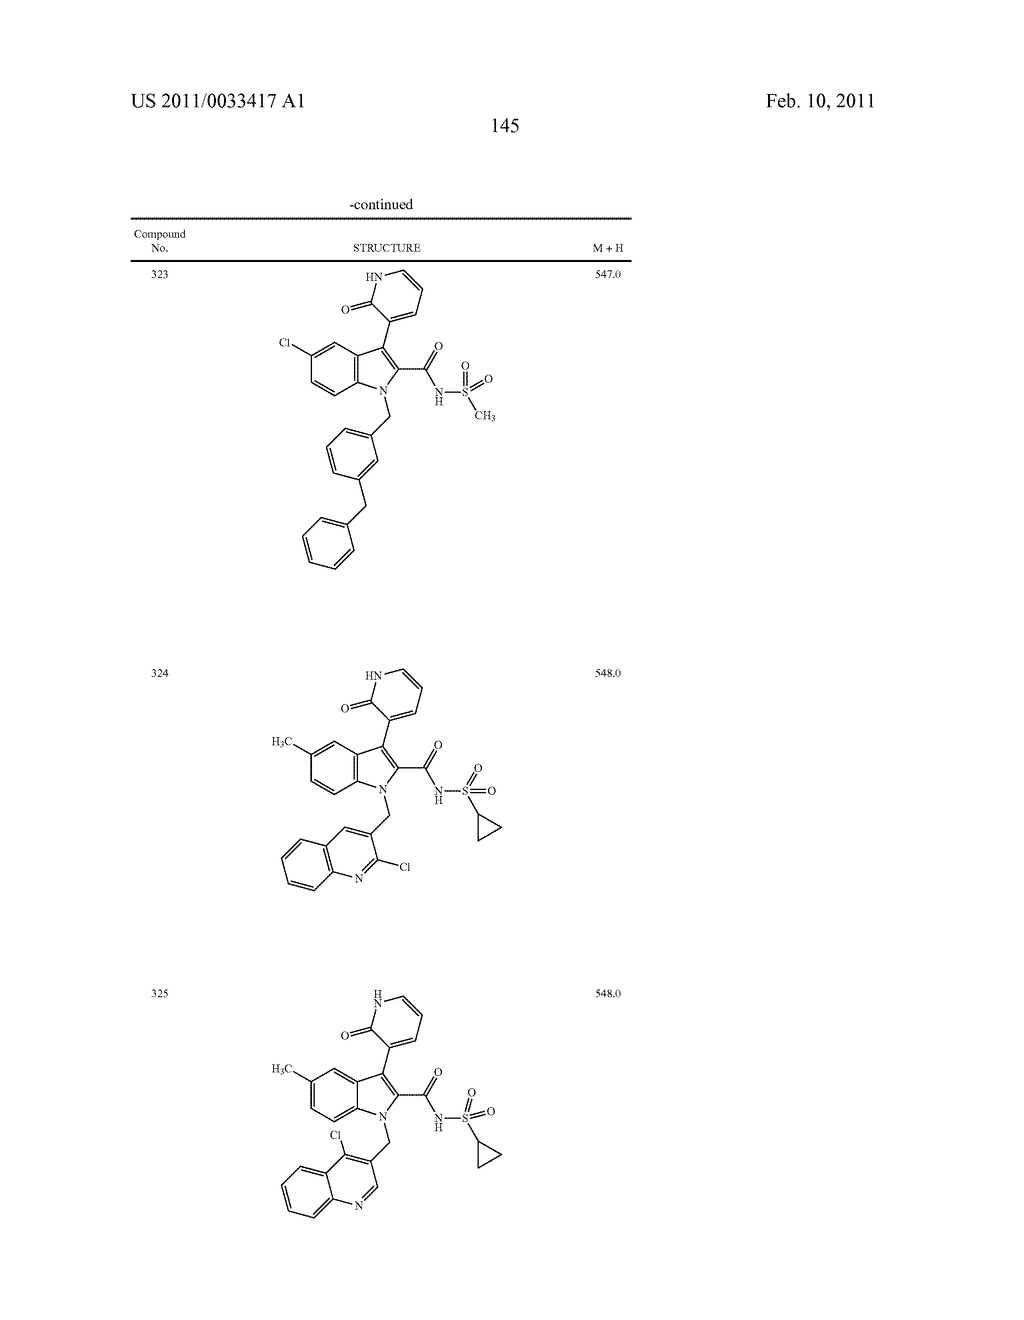 2,3-SUBSTITUTED INDOLE DERIVATIVES FOR TREATING VIRAL INFECTIONS - diagram, schematic, and image 146